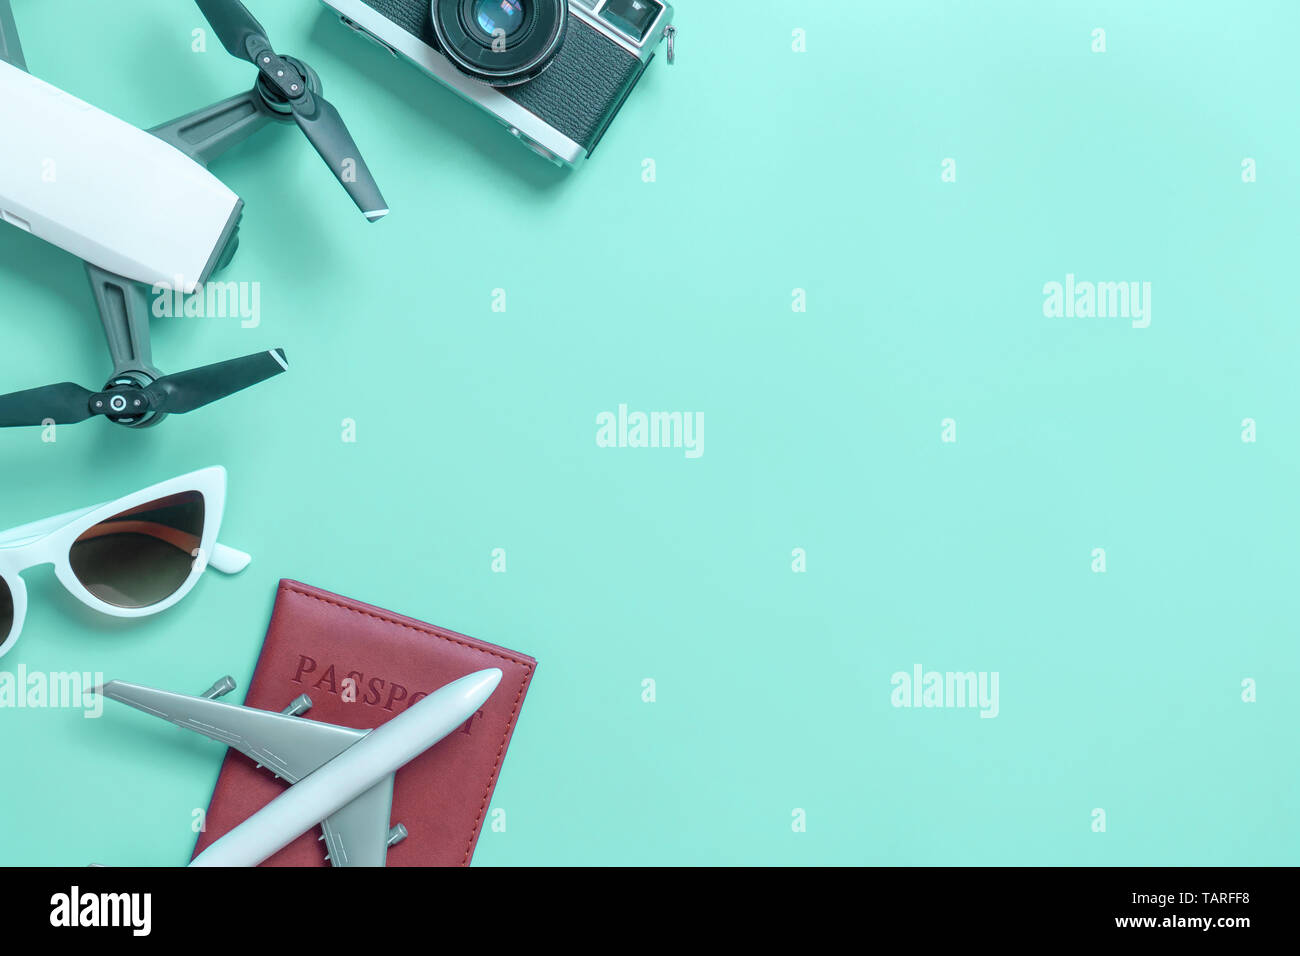 Travel gadgets flat lay on blue teal background for travel concept Stock Photo